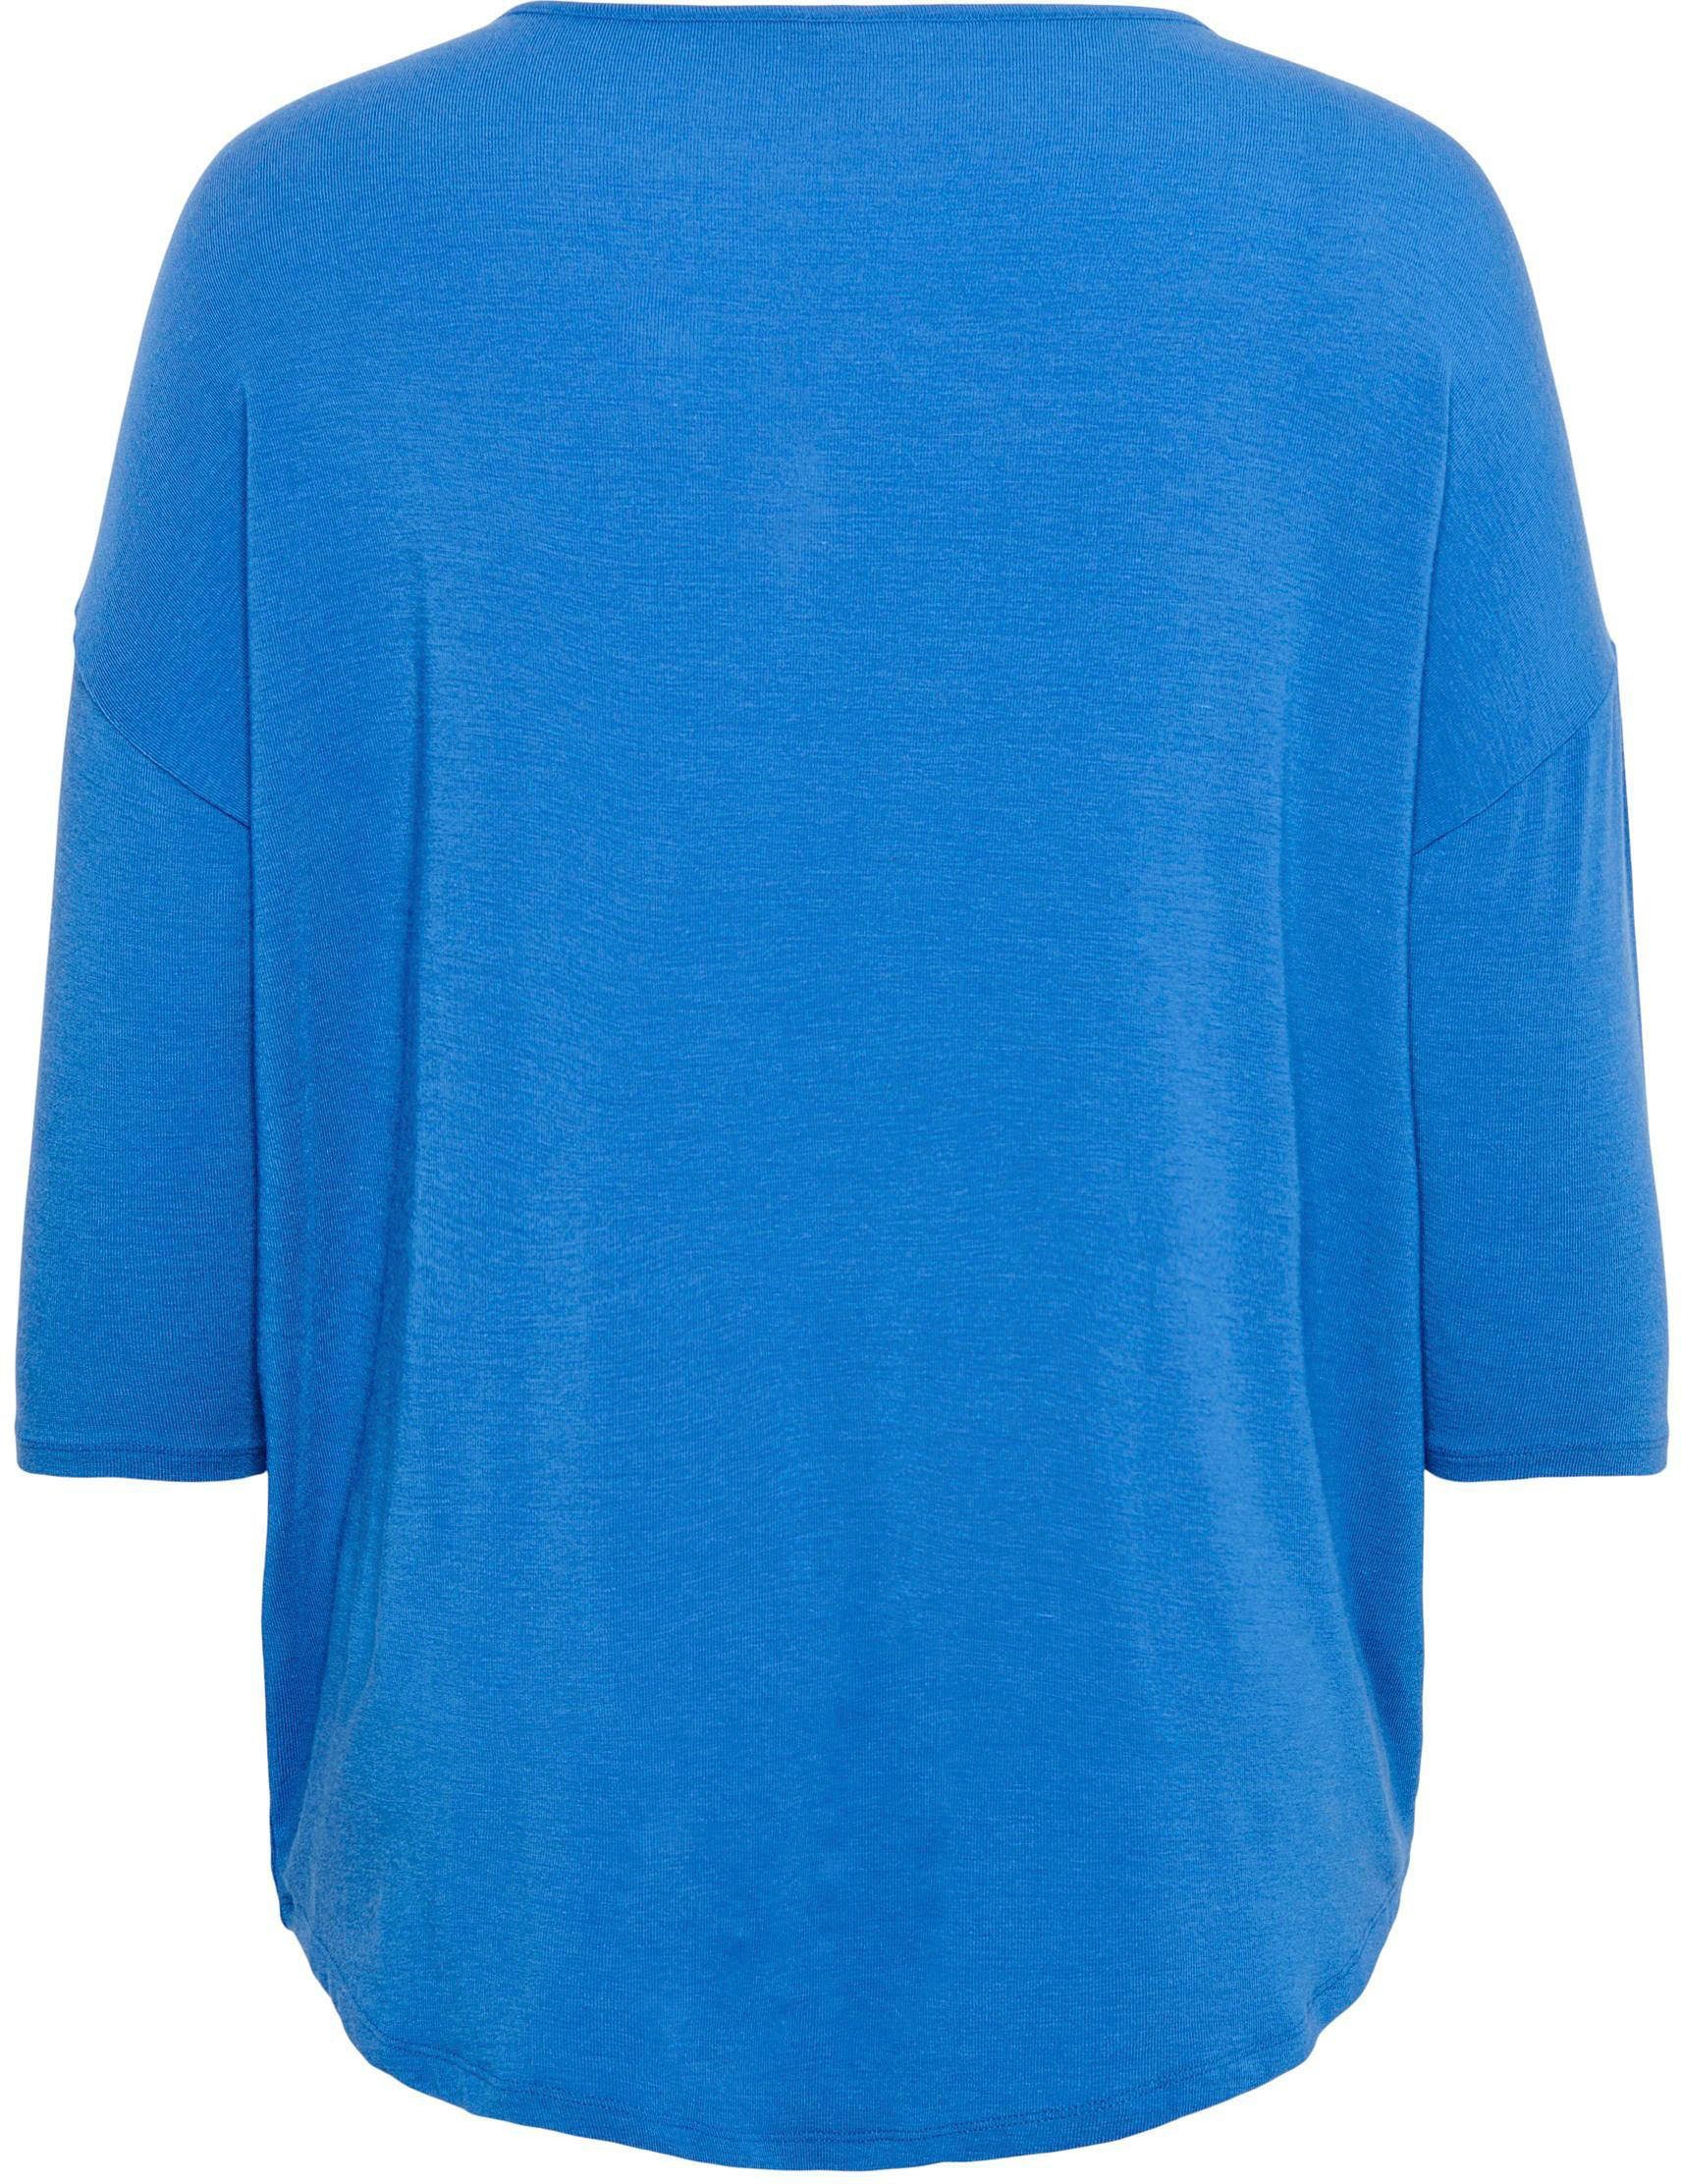 CARLAMOUR 3/4-Arm-Shirt Strong JRS 3/4 ONLY TOP CARMAKOMA Blue NOOS